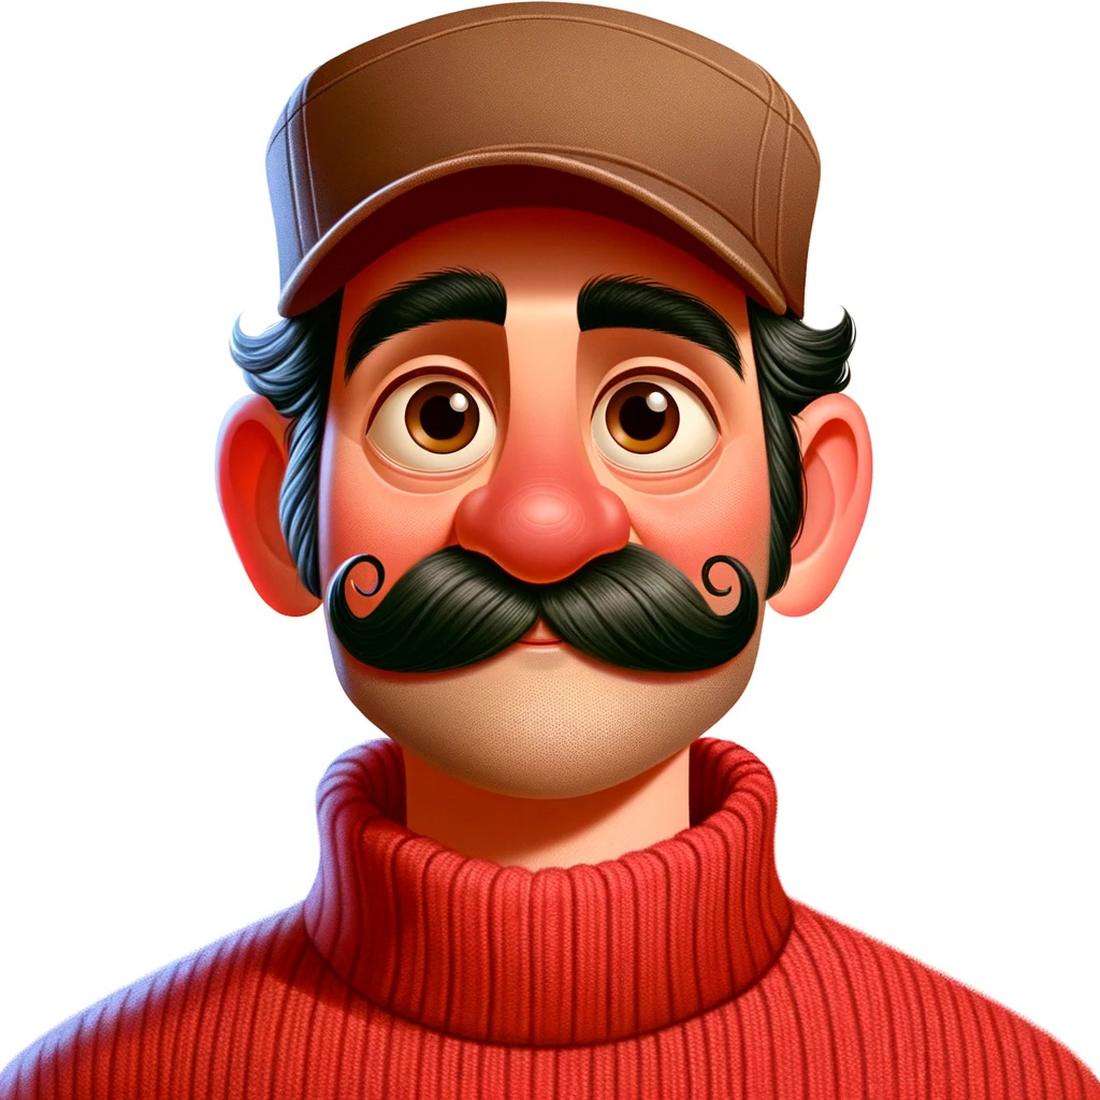 AI of a man wearing a hat and has a fancy mustache, in a cartoon style